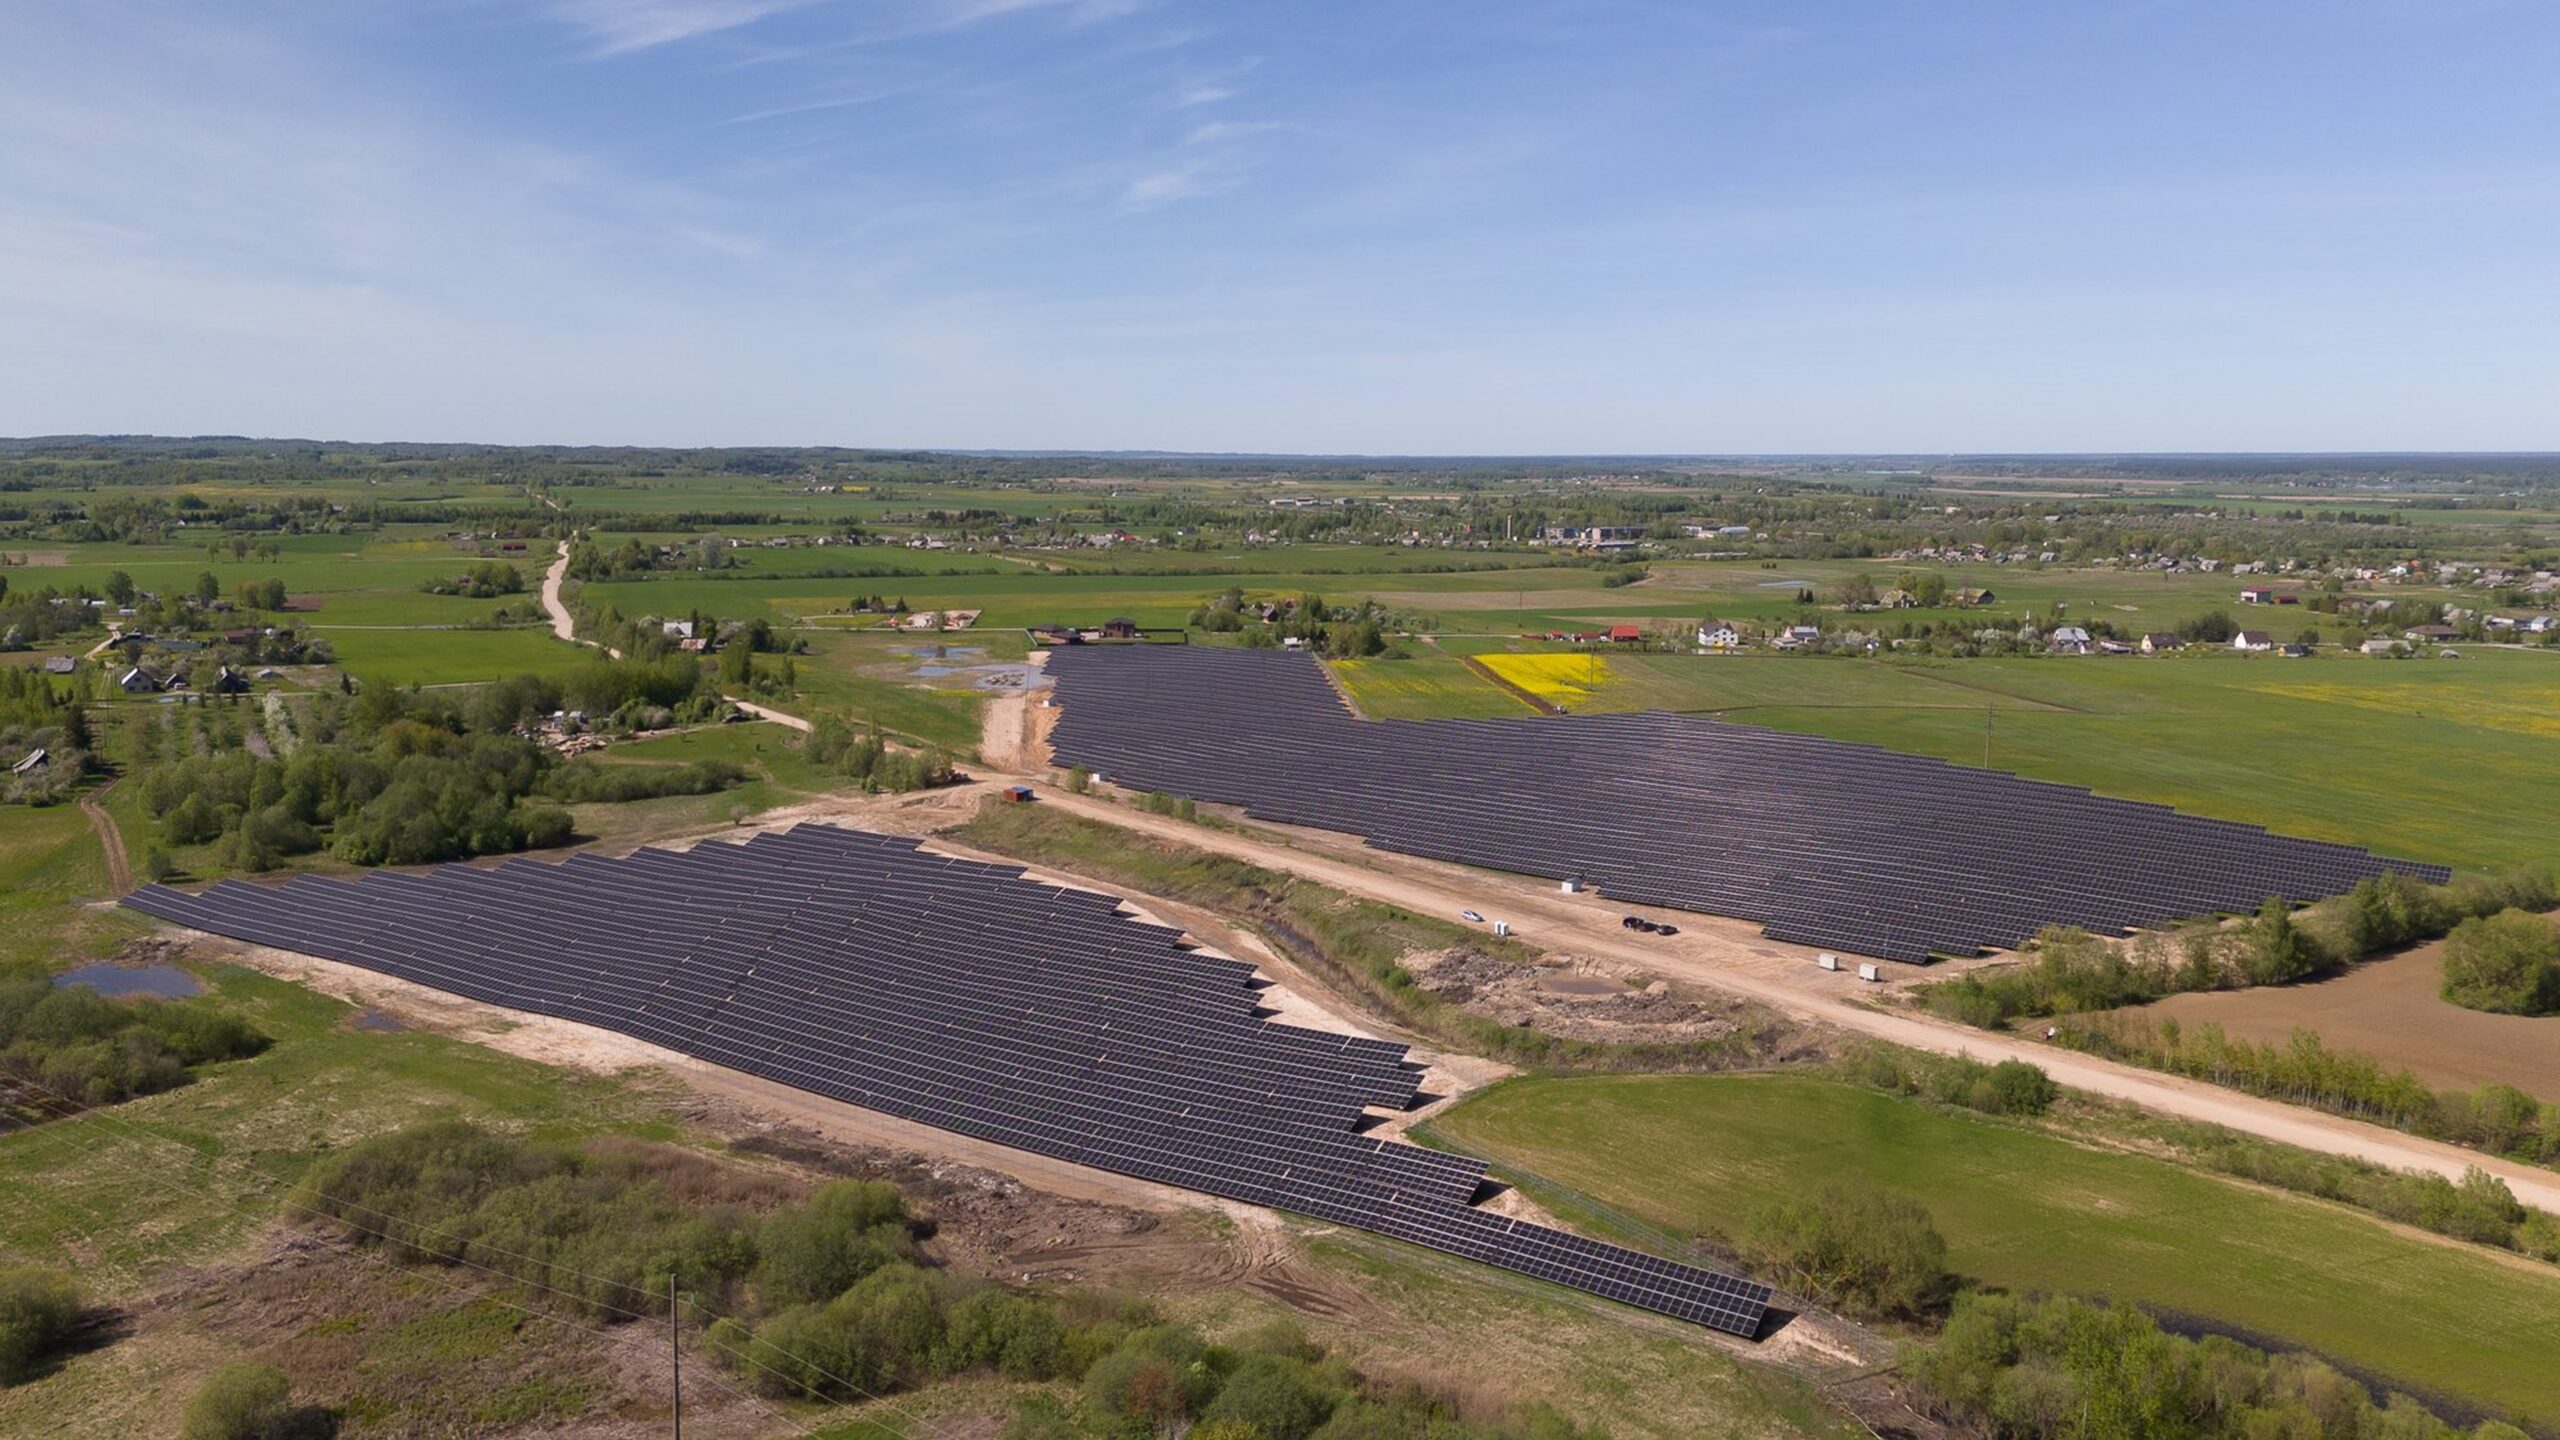 The largest solar power plant in Latvia commissioned near Daugavpils